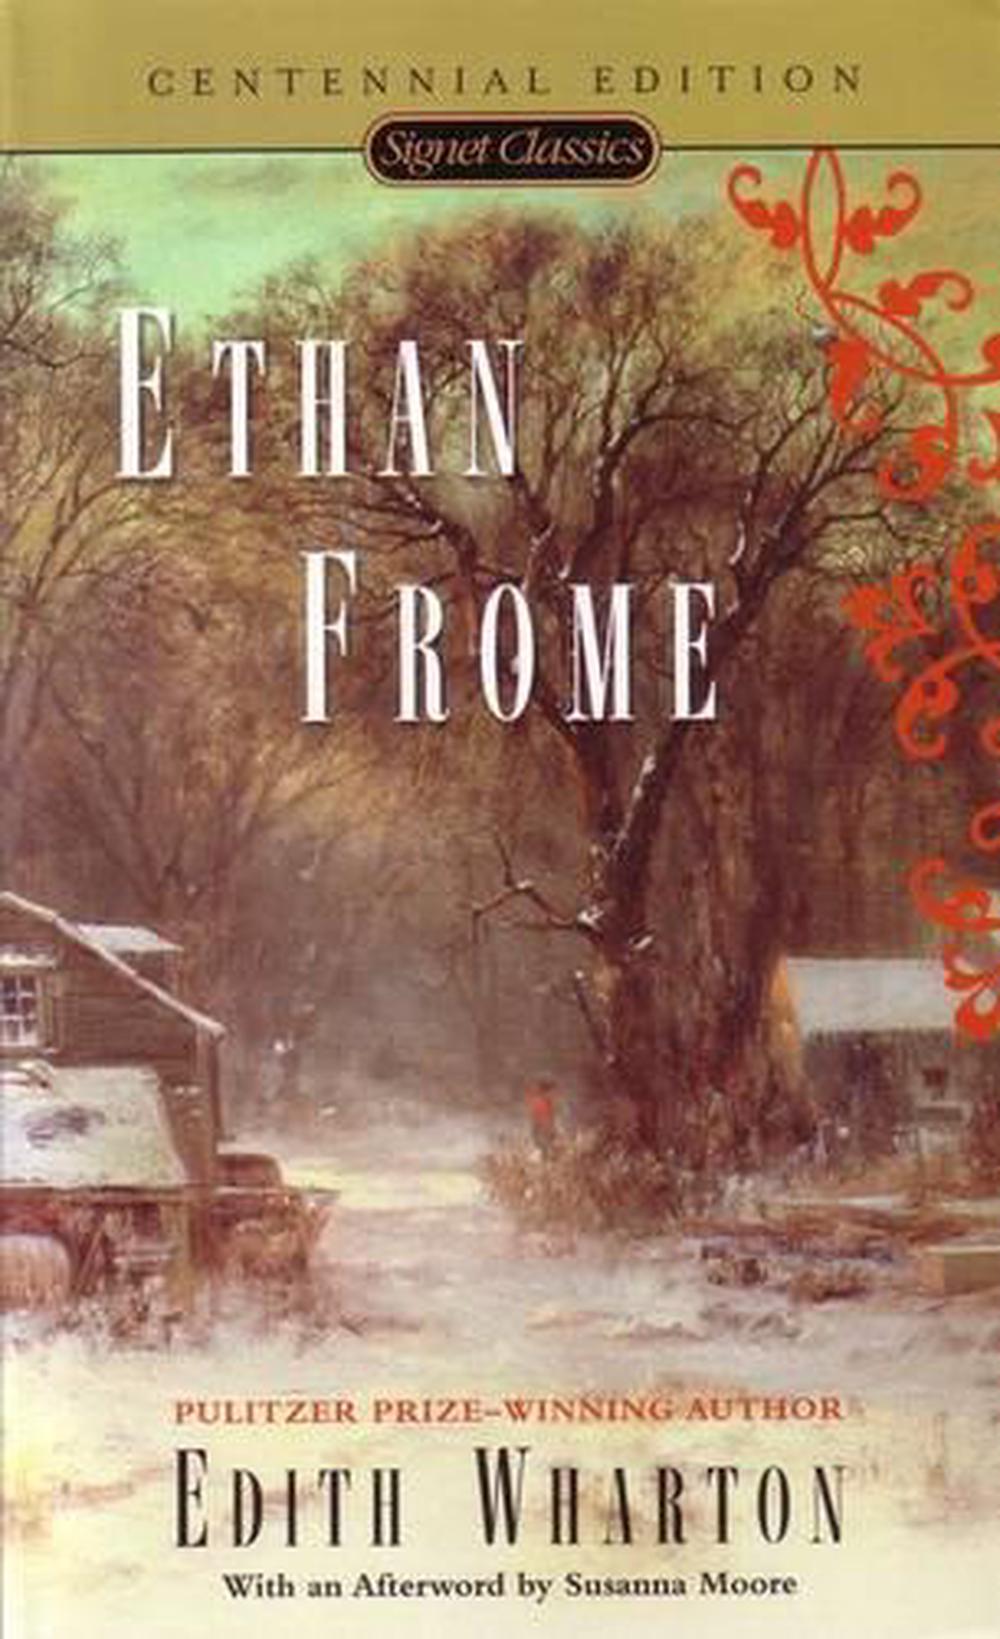 ethanfrome